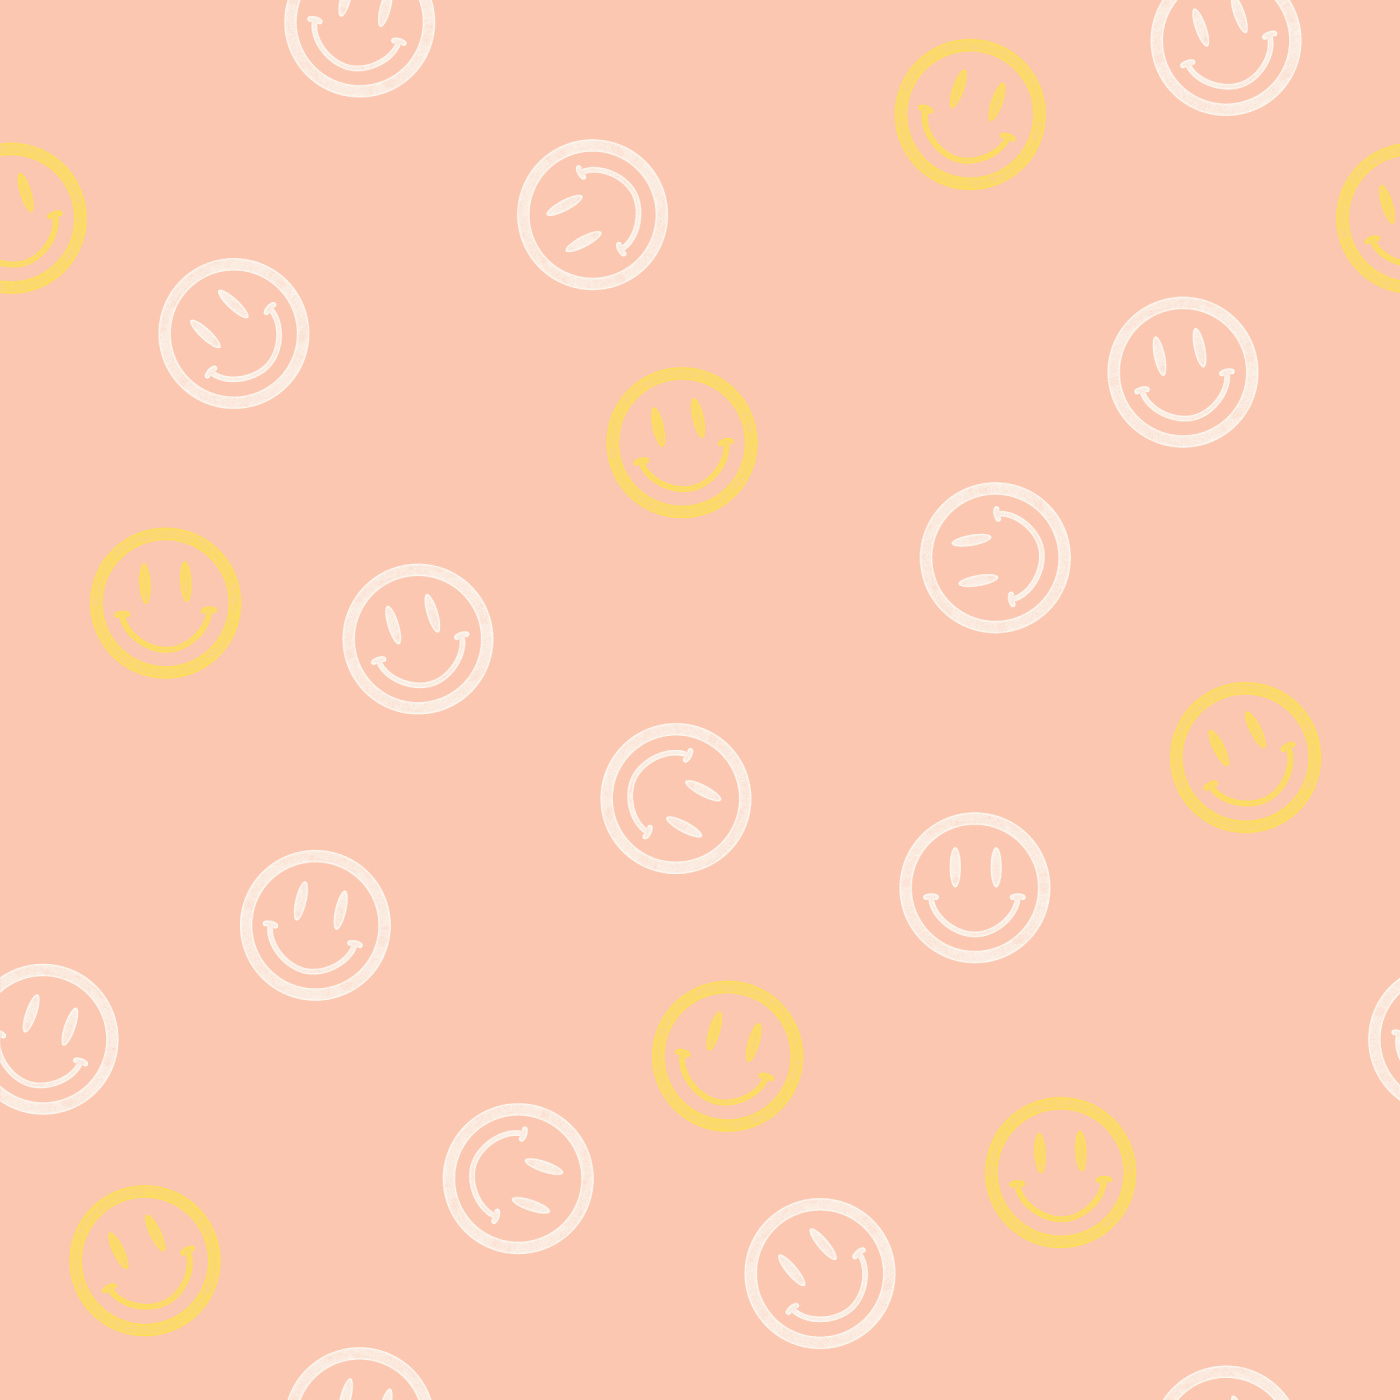 Smileyface Wallpaper to Match Any Homes Decor  Society6